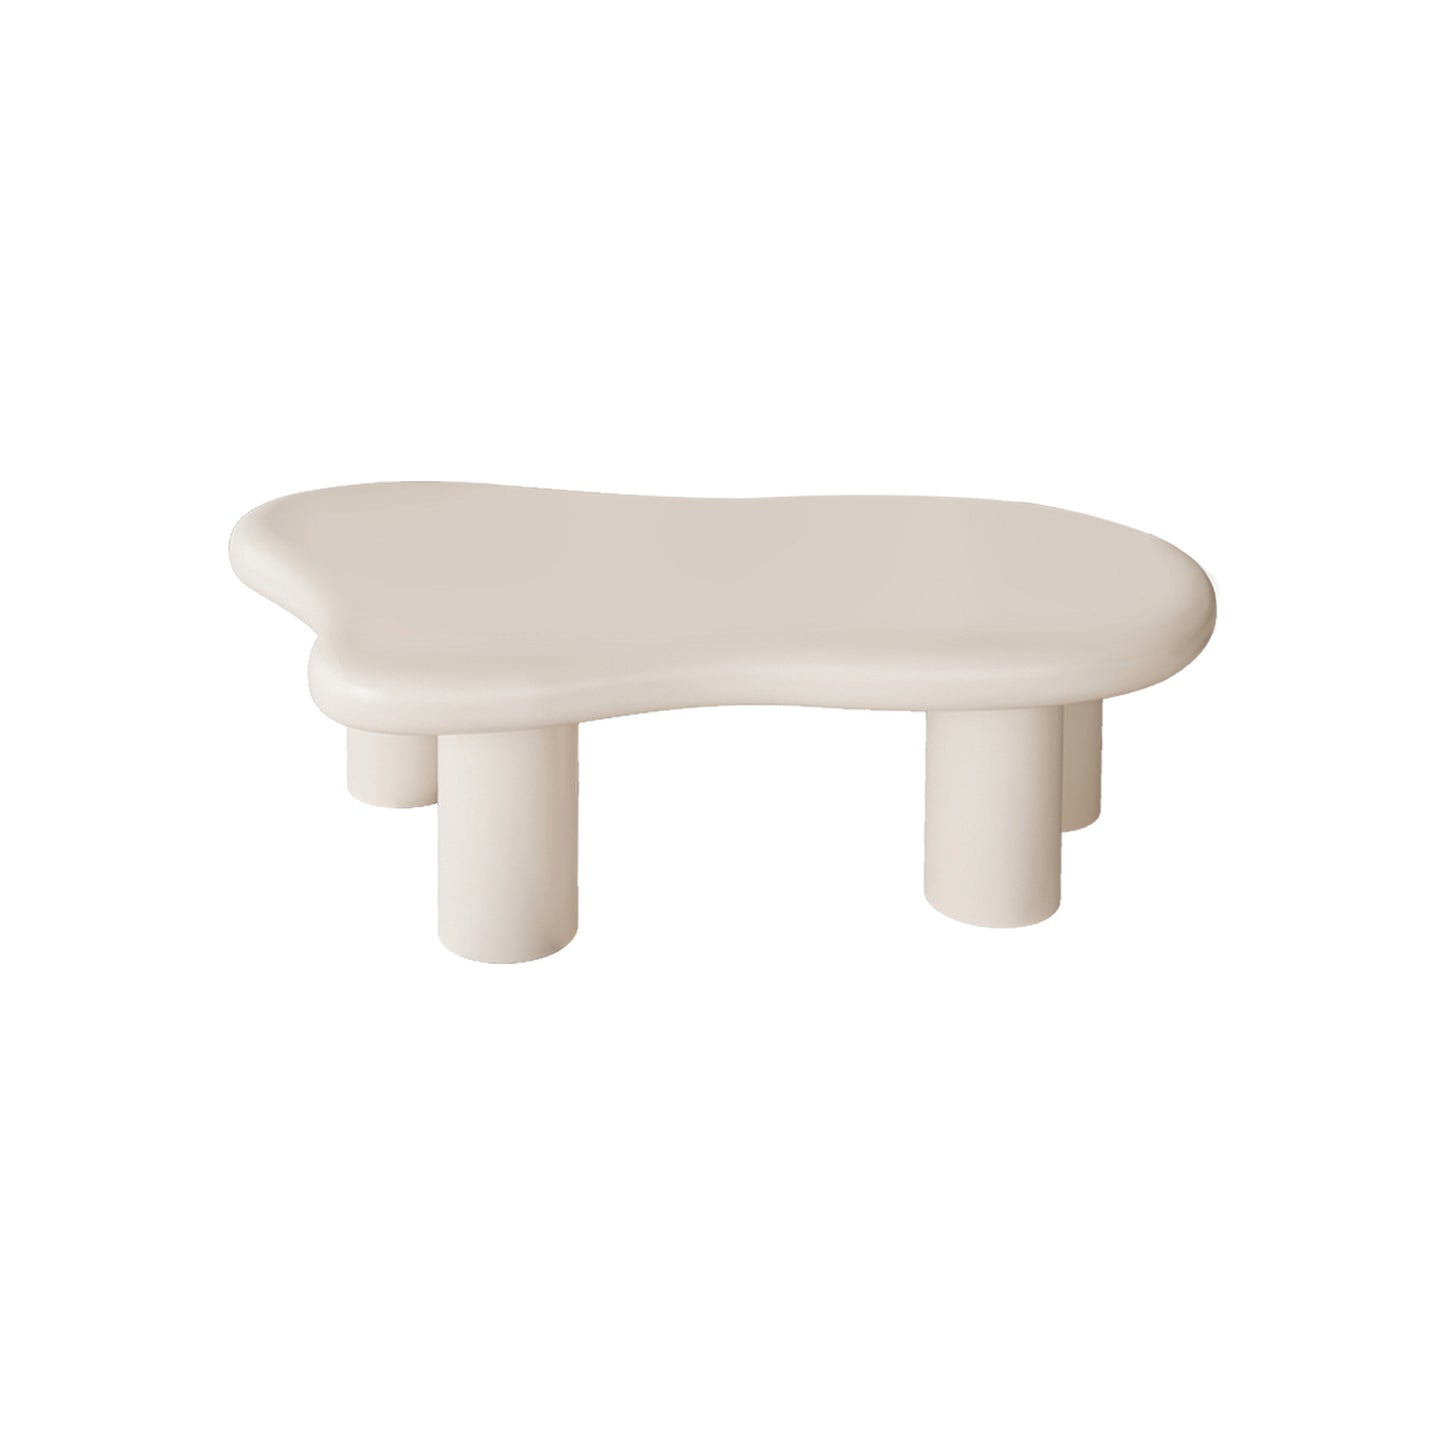 47 Inch Cream Cloud Shaped Coffee Table for Living Room